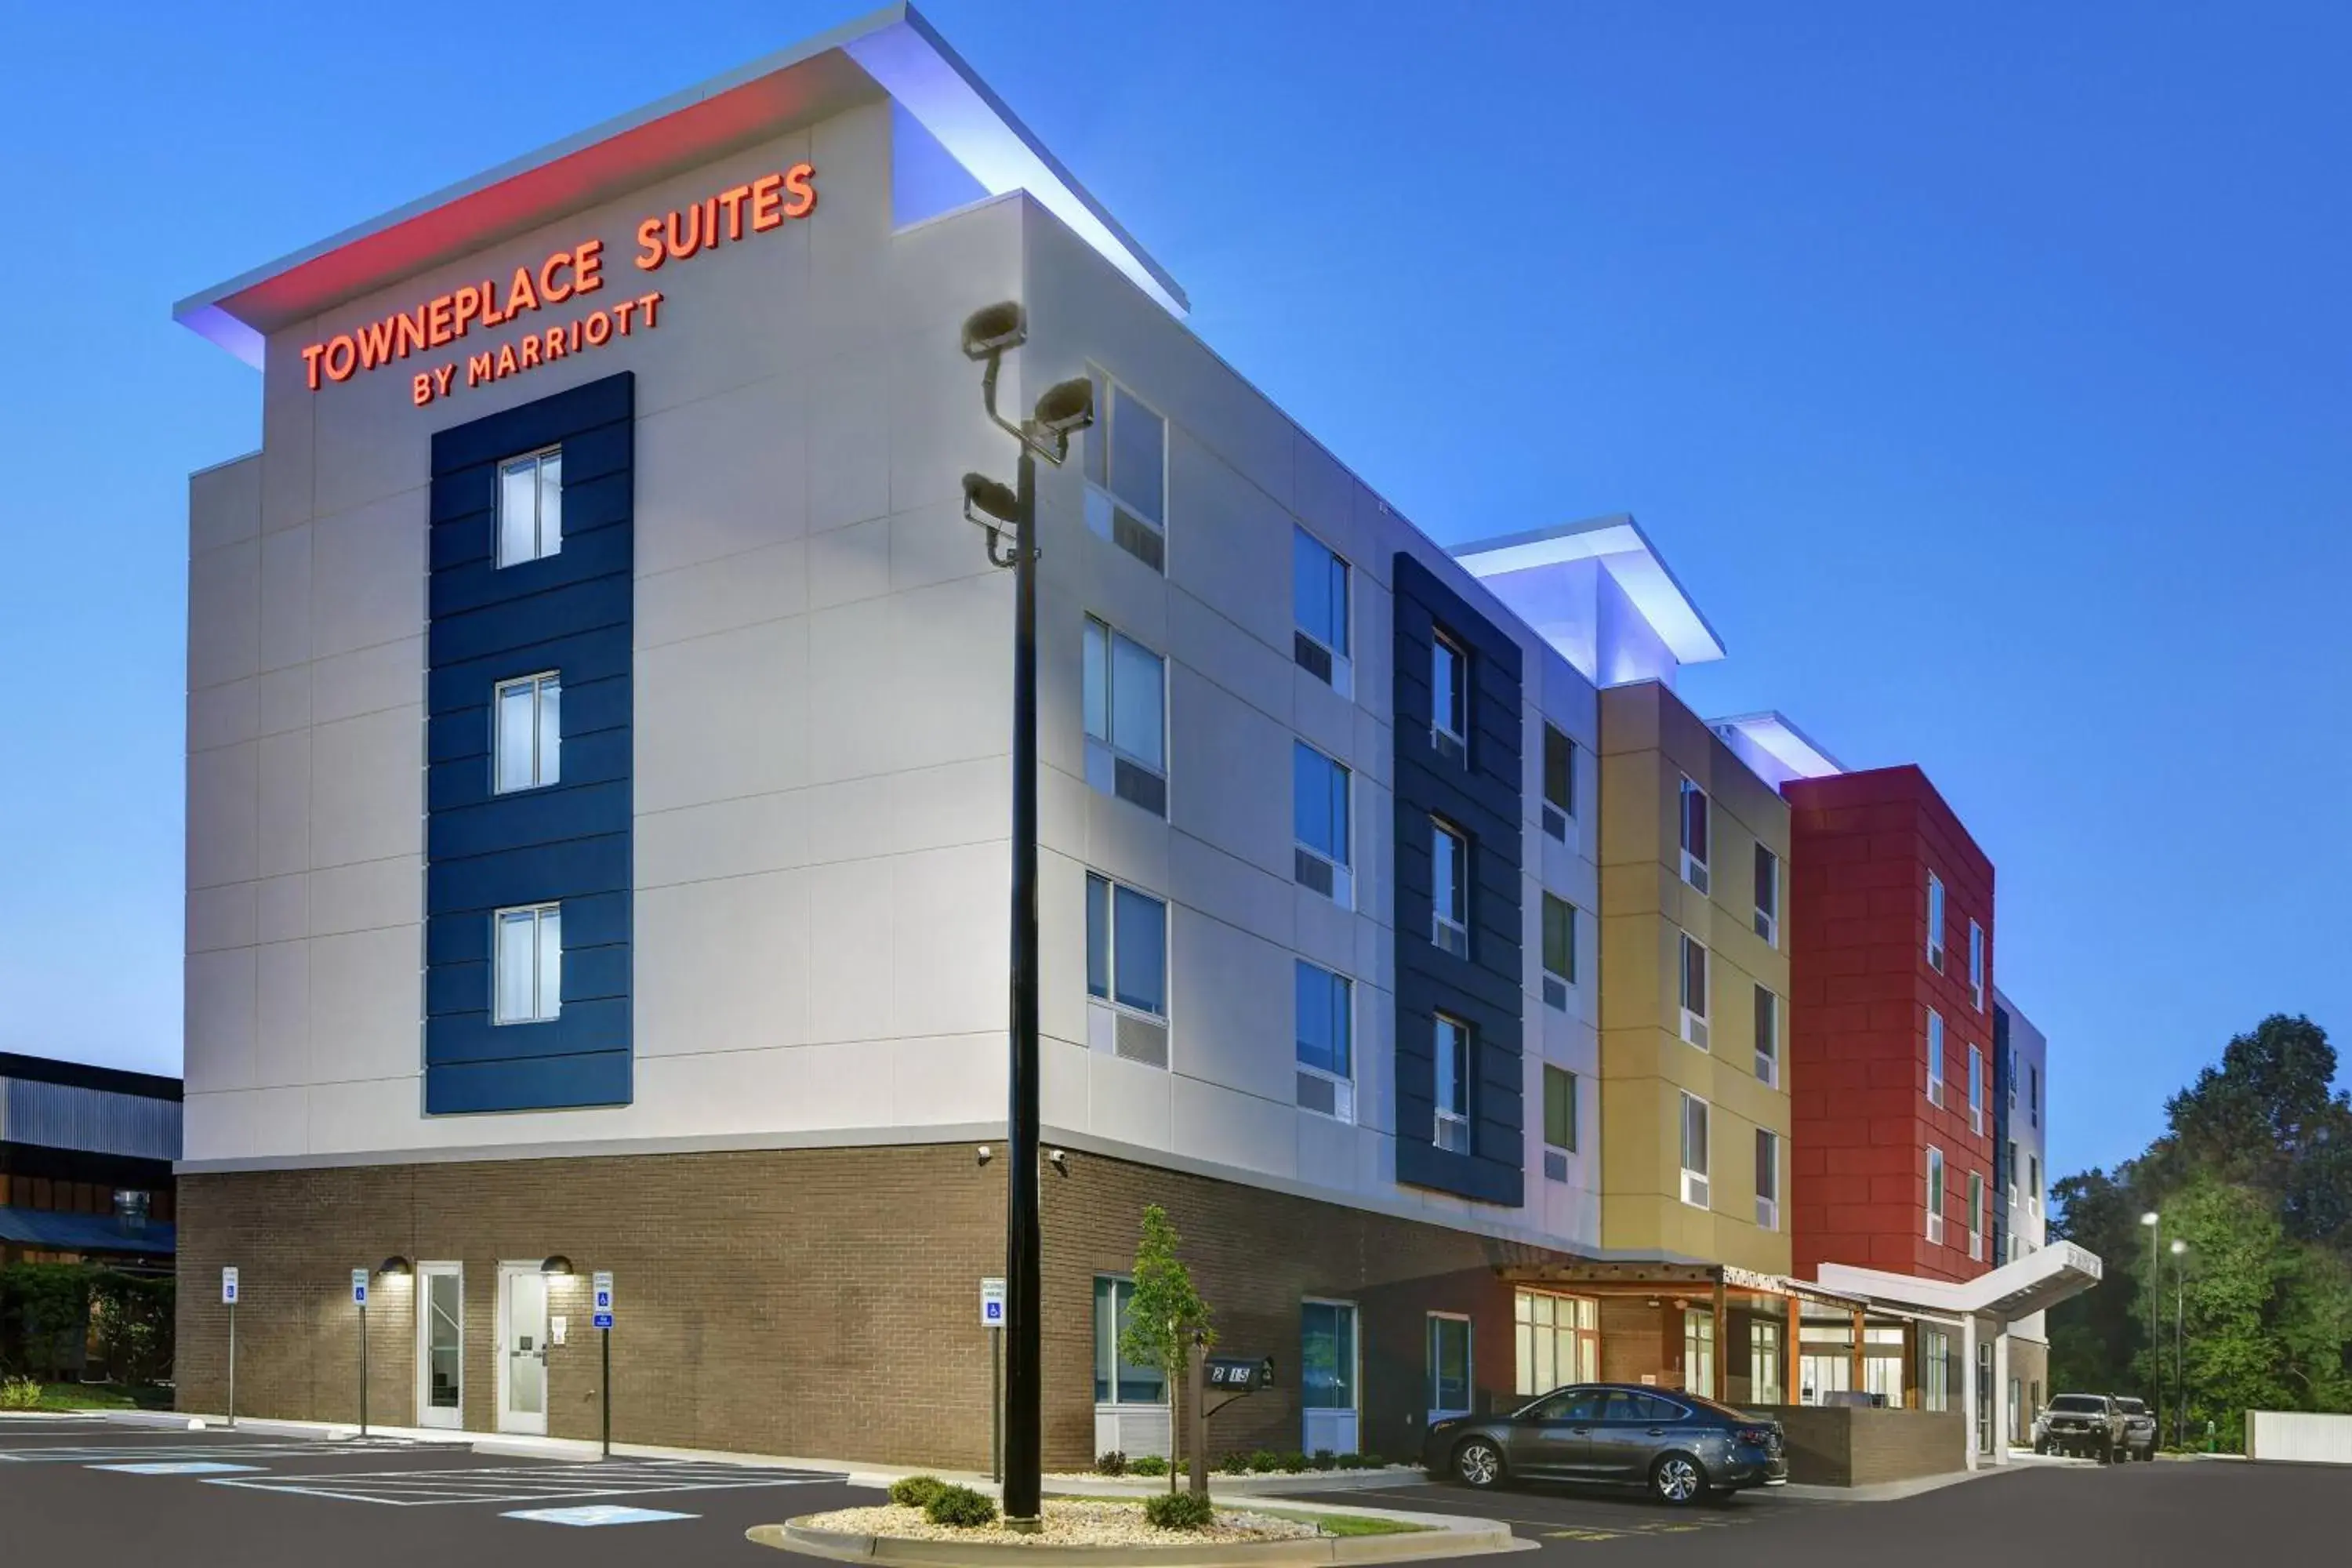 Property Building in TownePlace Suites by Marriott Sumter